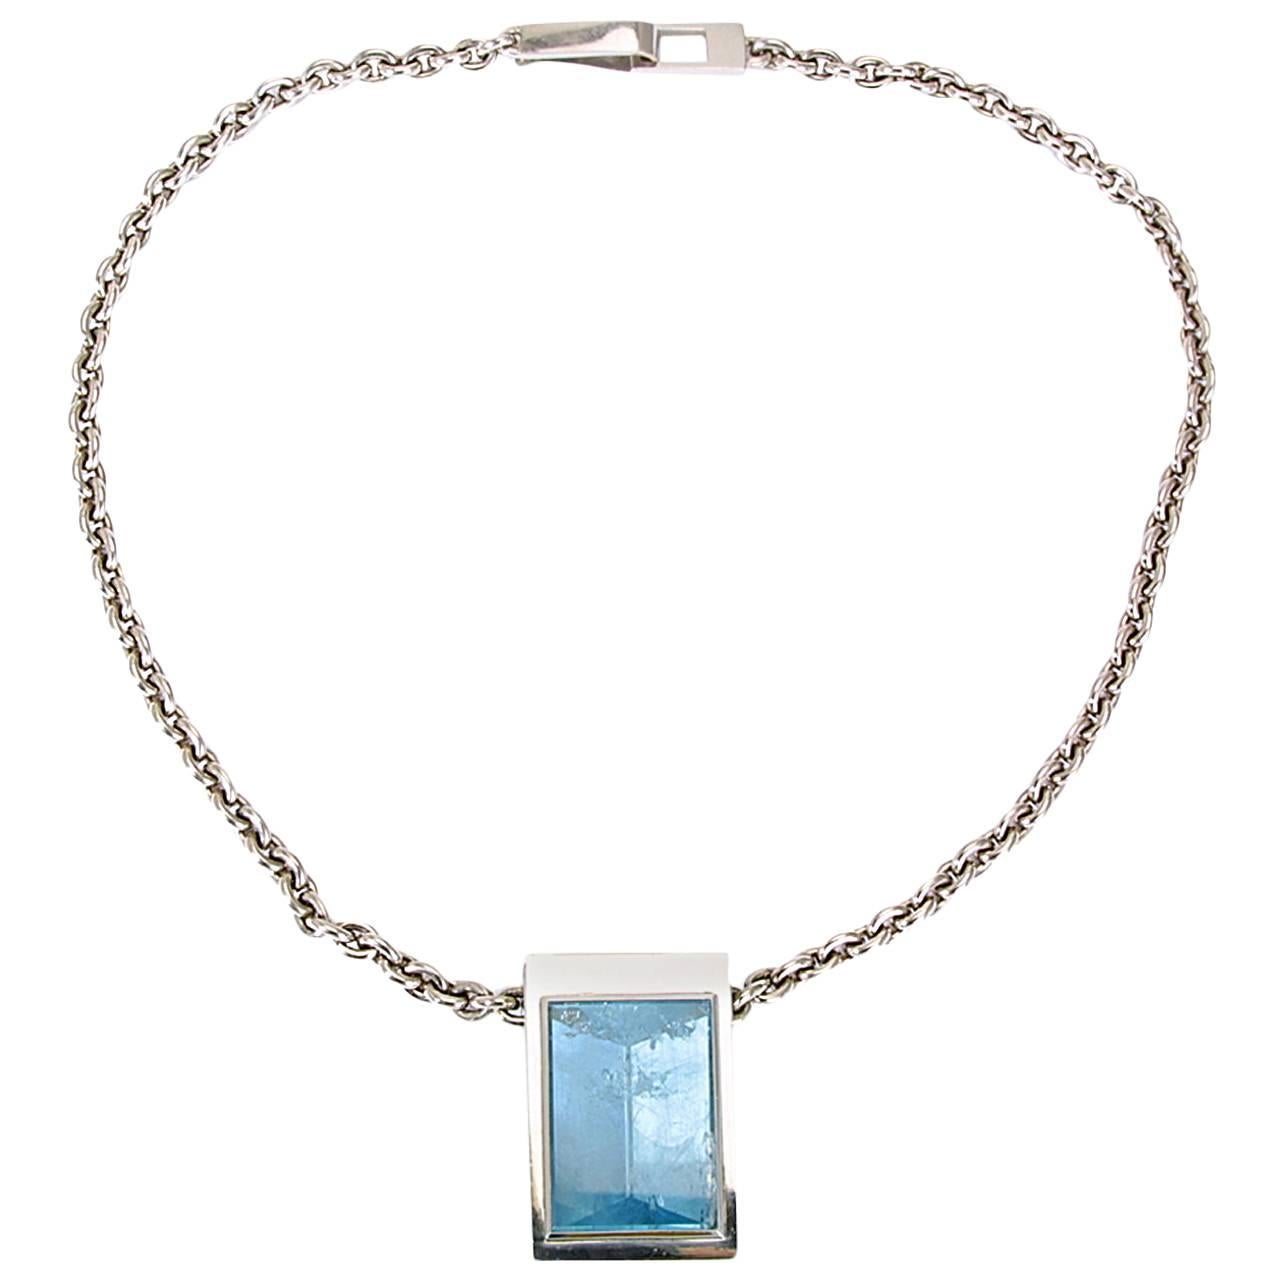 This marvelous aquamarine 63.04 ct adorns this 18k white gold necklace which is 51.5 cm long. The pendant is 4.2 cm long and 2.8 cm wide. This aquamarine has a very special mirror cut.
Designed by Colleen B. Rosenblat.